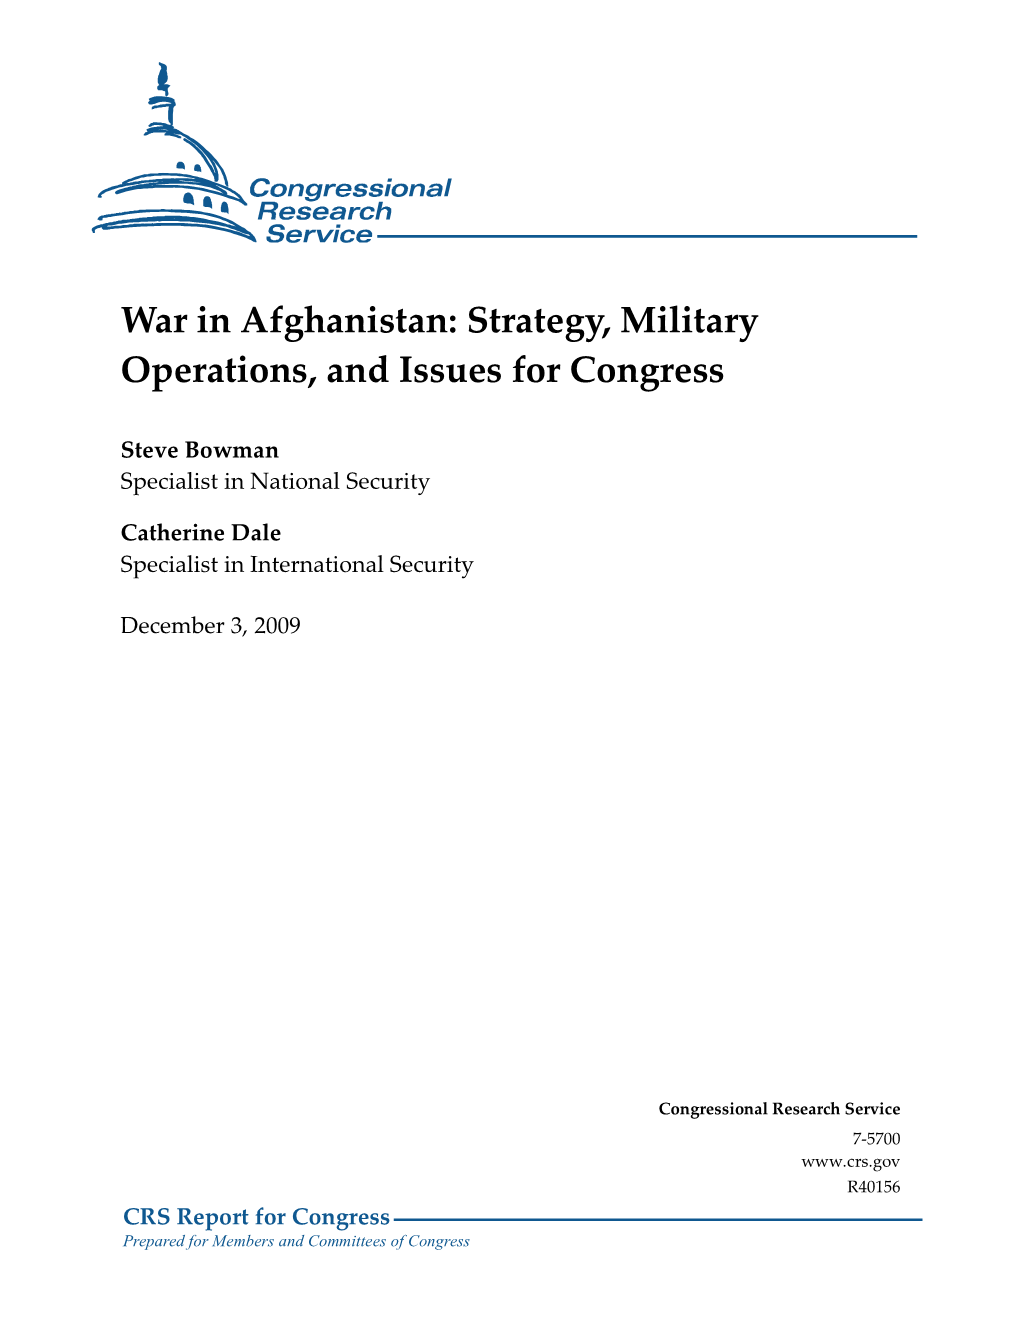 War in Afghanistan: Strategy, Military Operations, and Issues for Congress